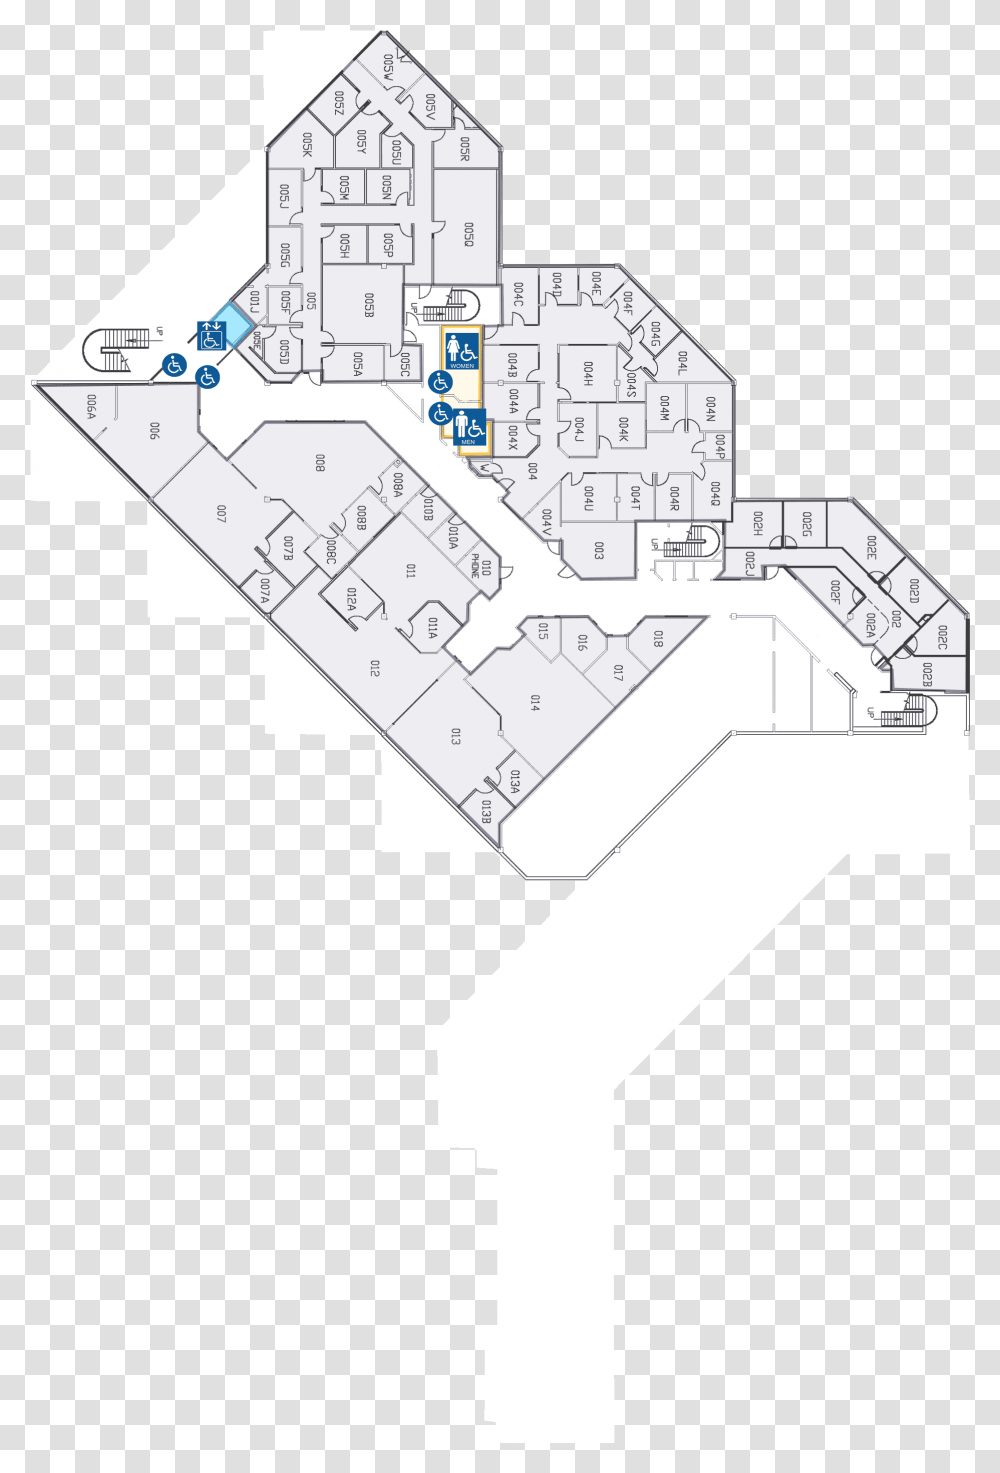 Browning Administration Level Uvu Browning Administration Building Map, Plan, Plot, Diagram, Cross Transparent Png